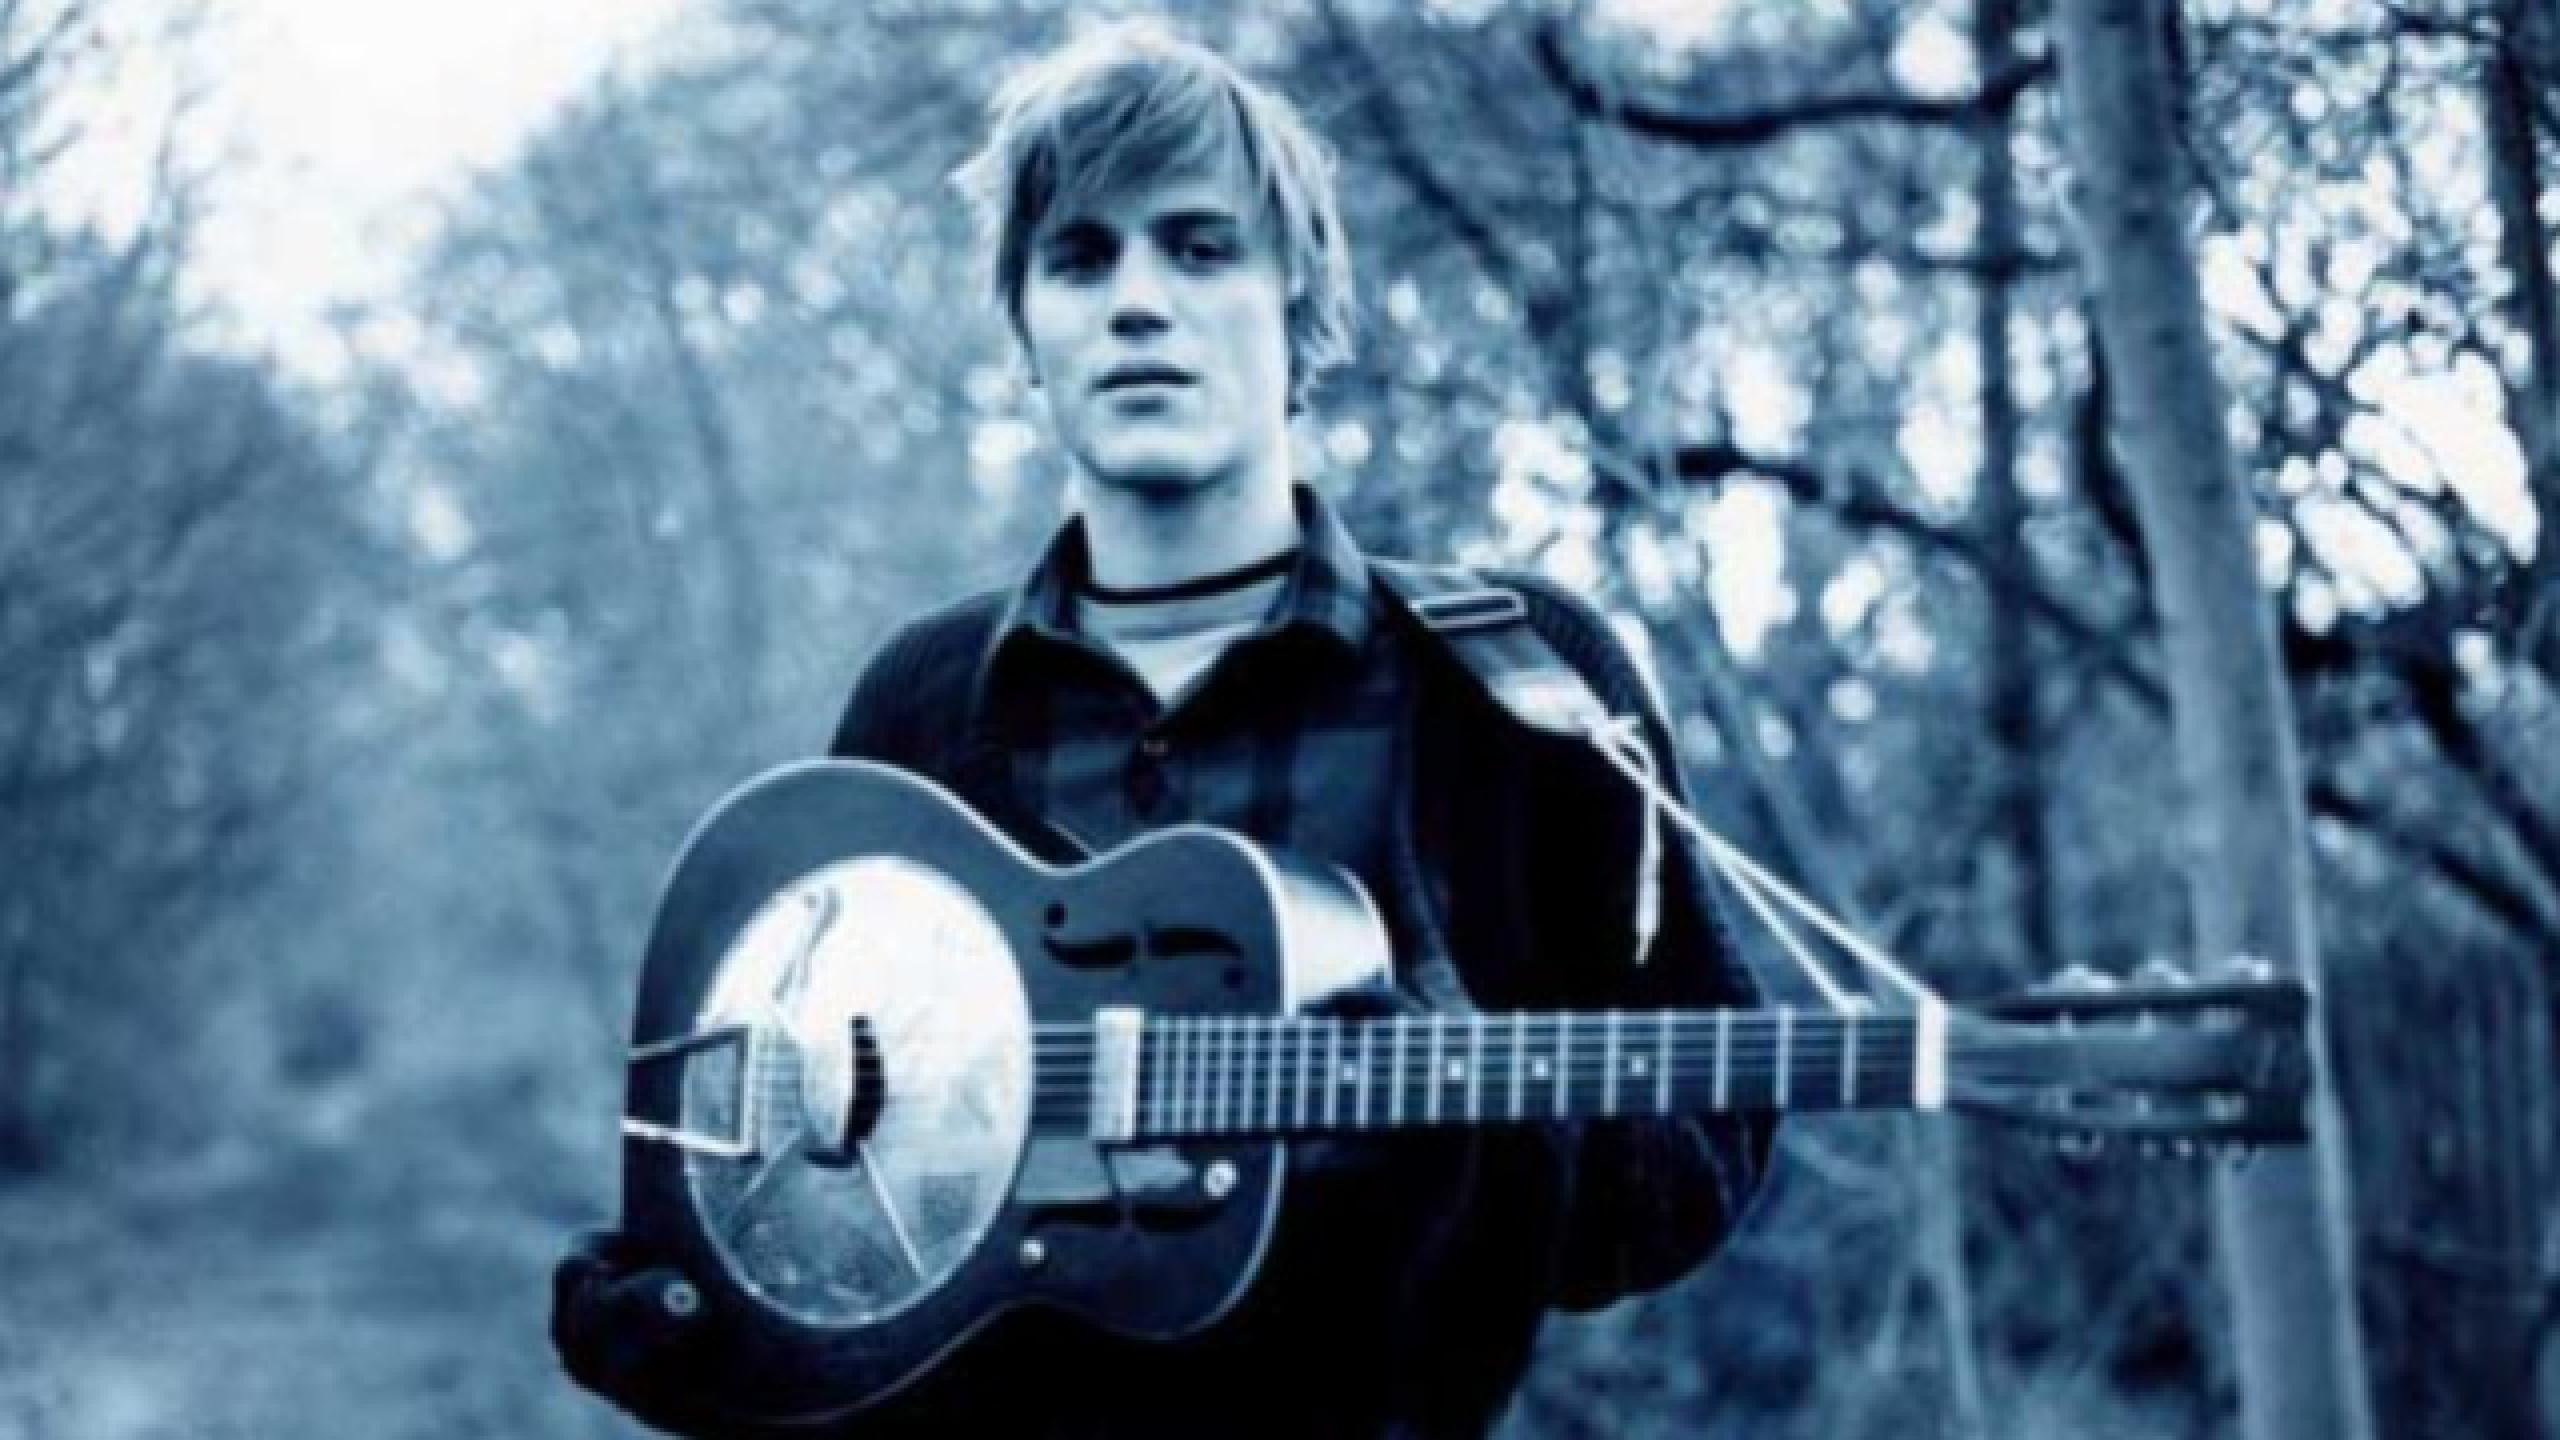 johnny flynn & the sussex wit tour